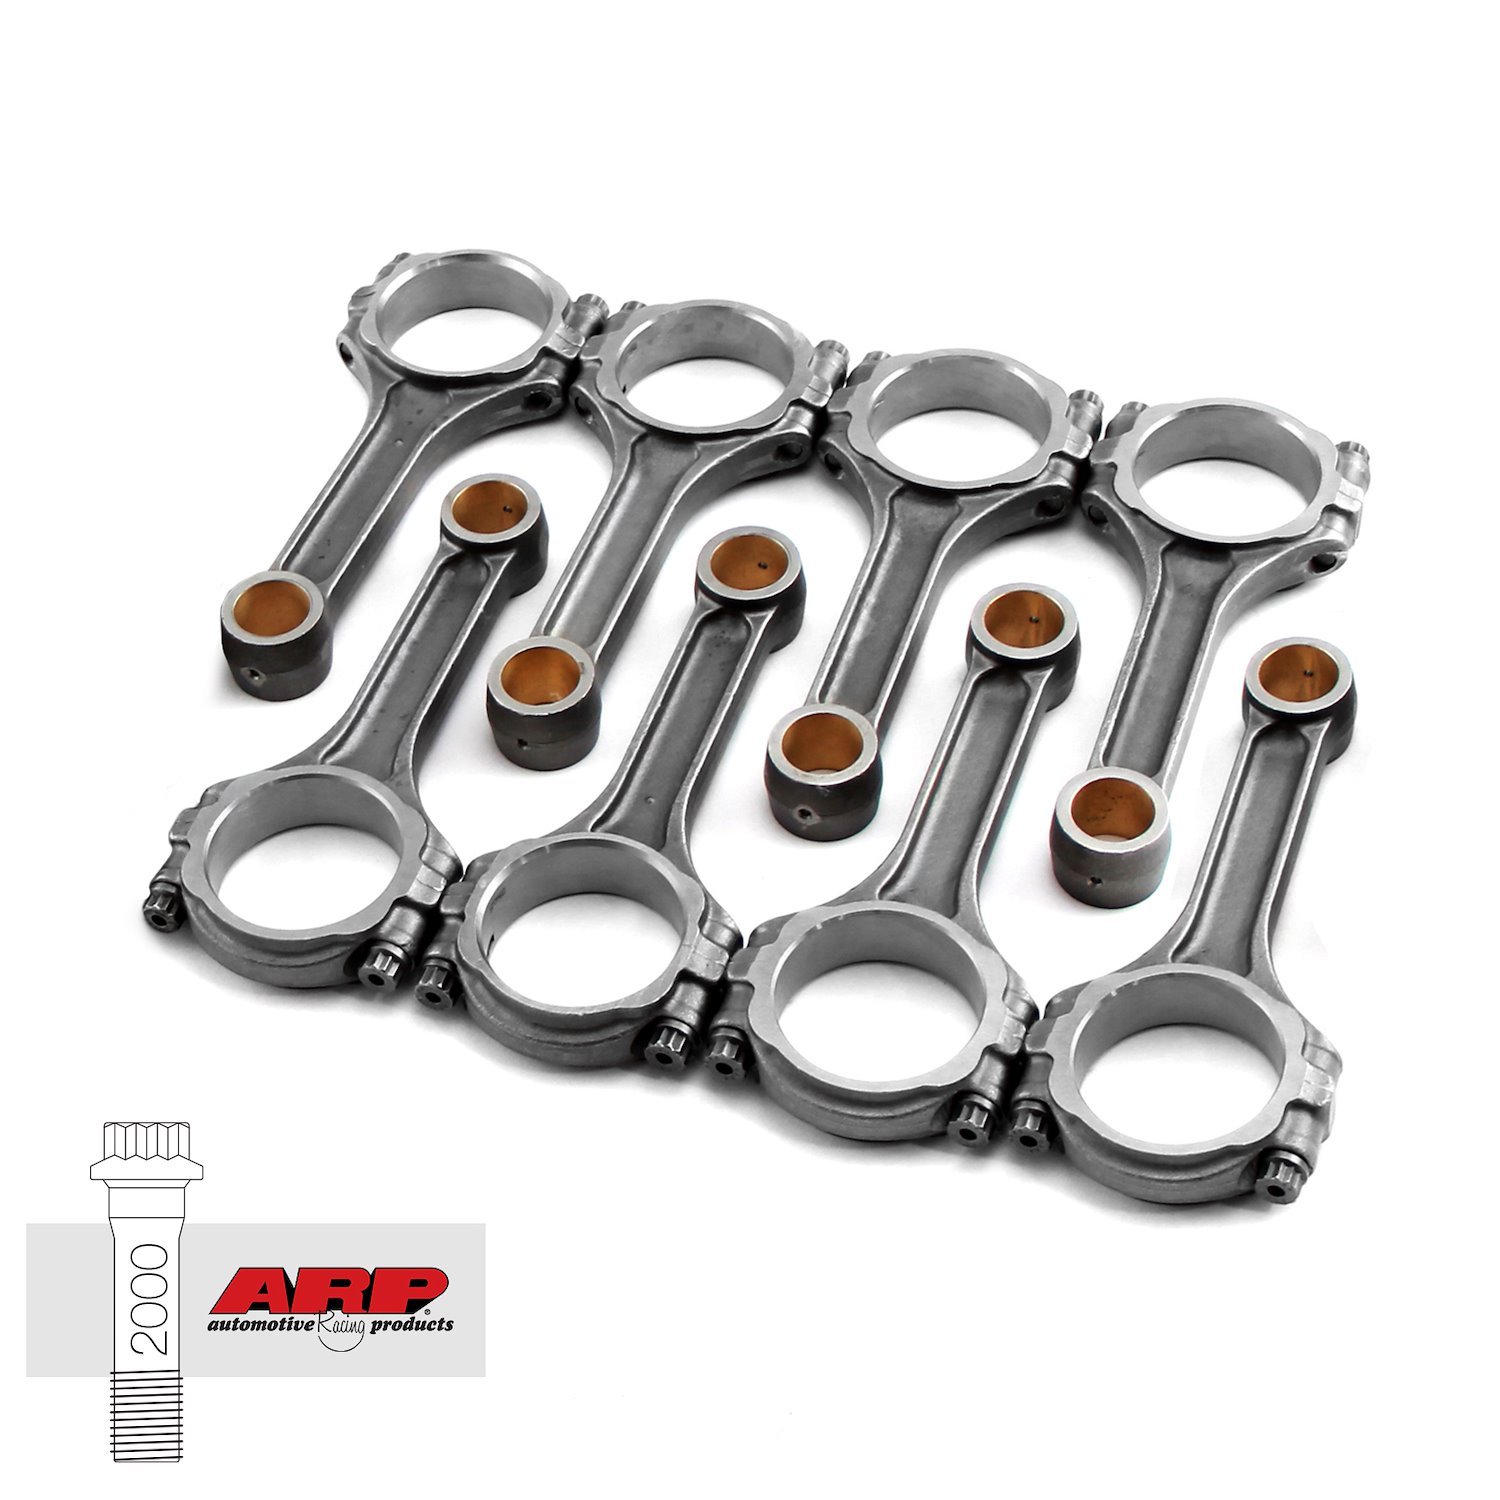 I BEAM 6.125 2.100 .927 5140 CONNECTING RODS